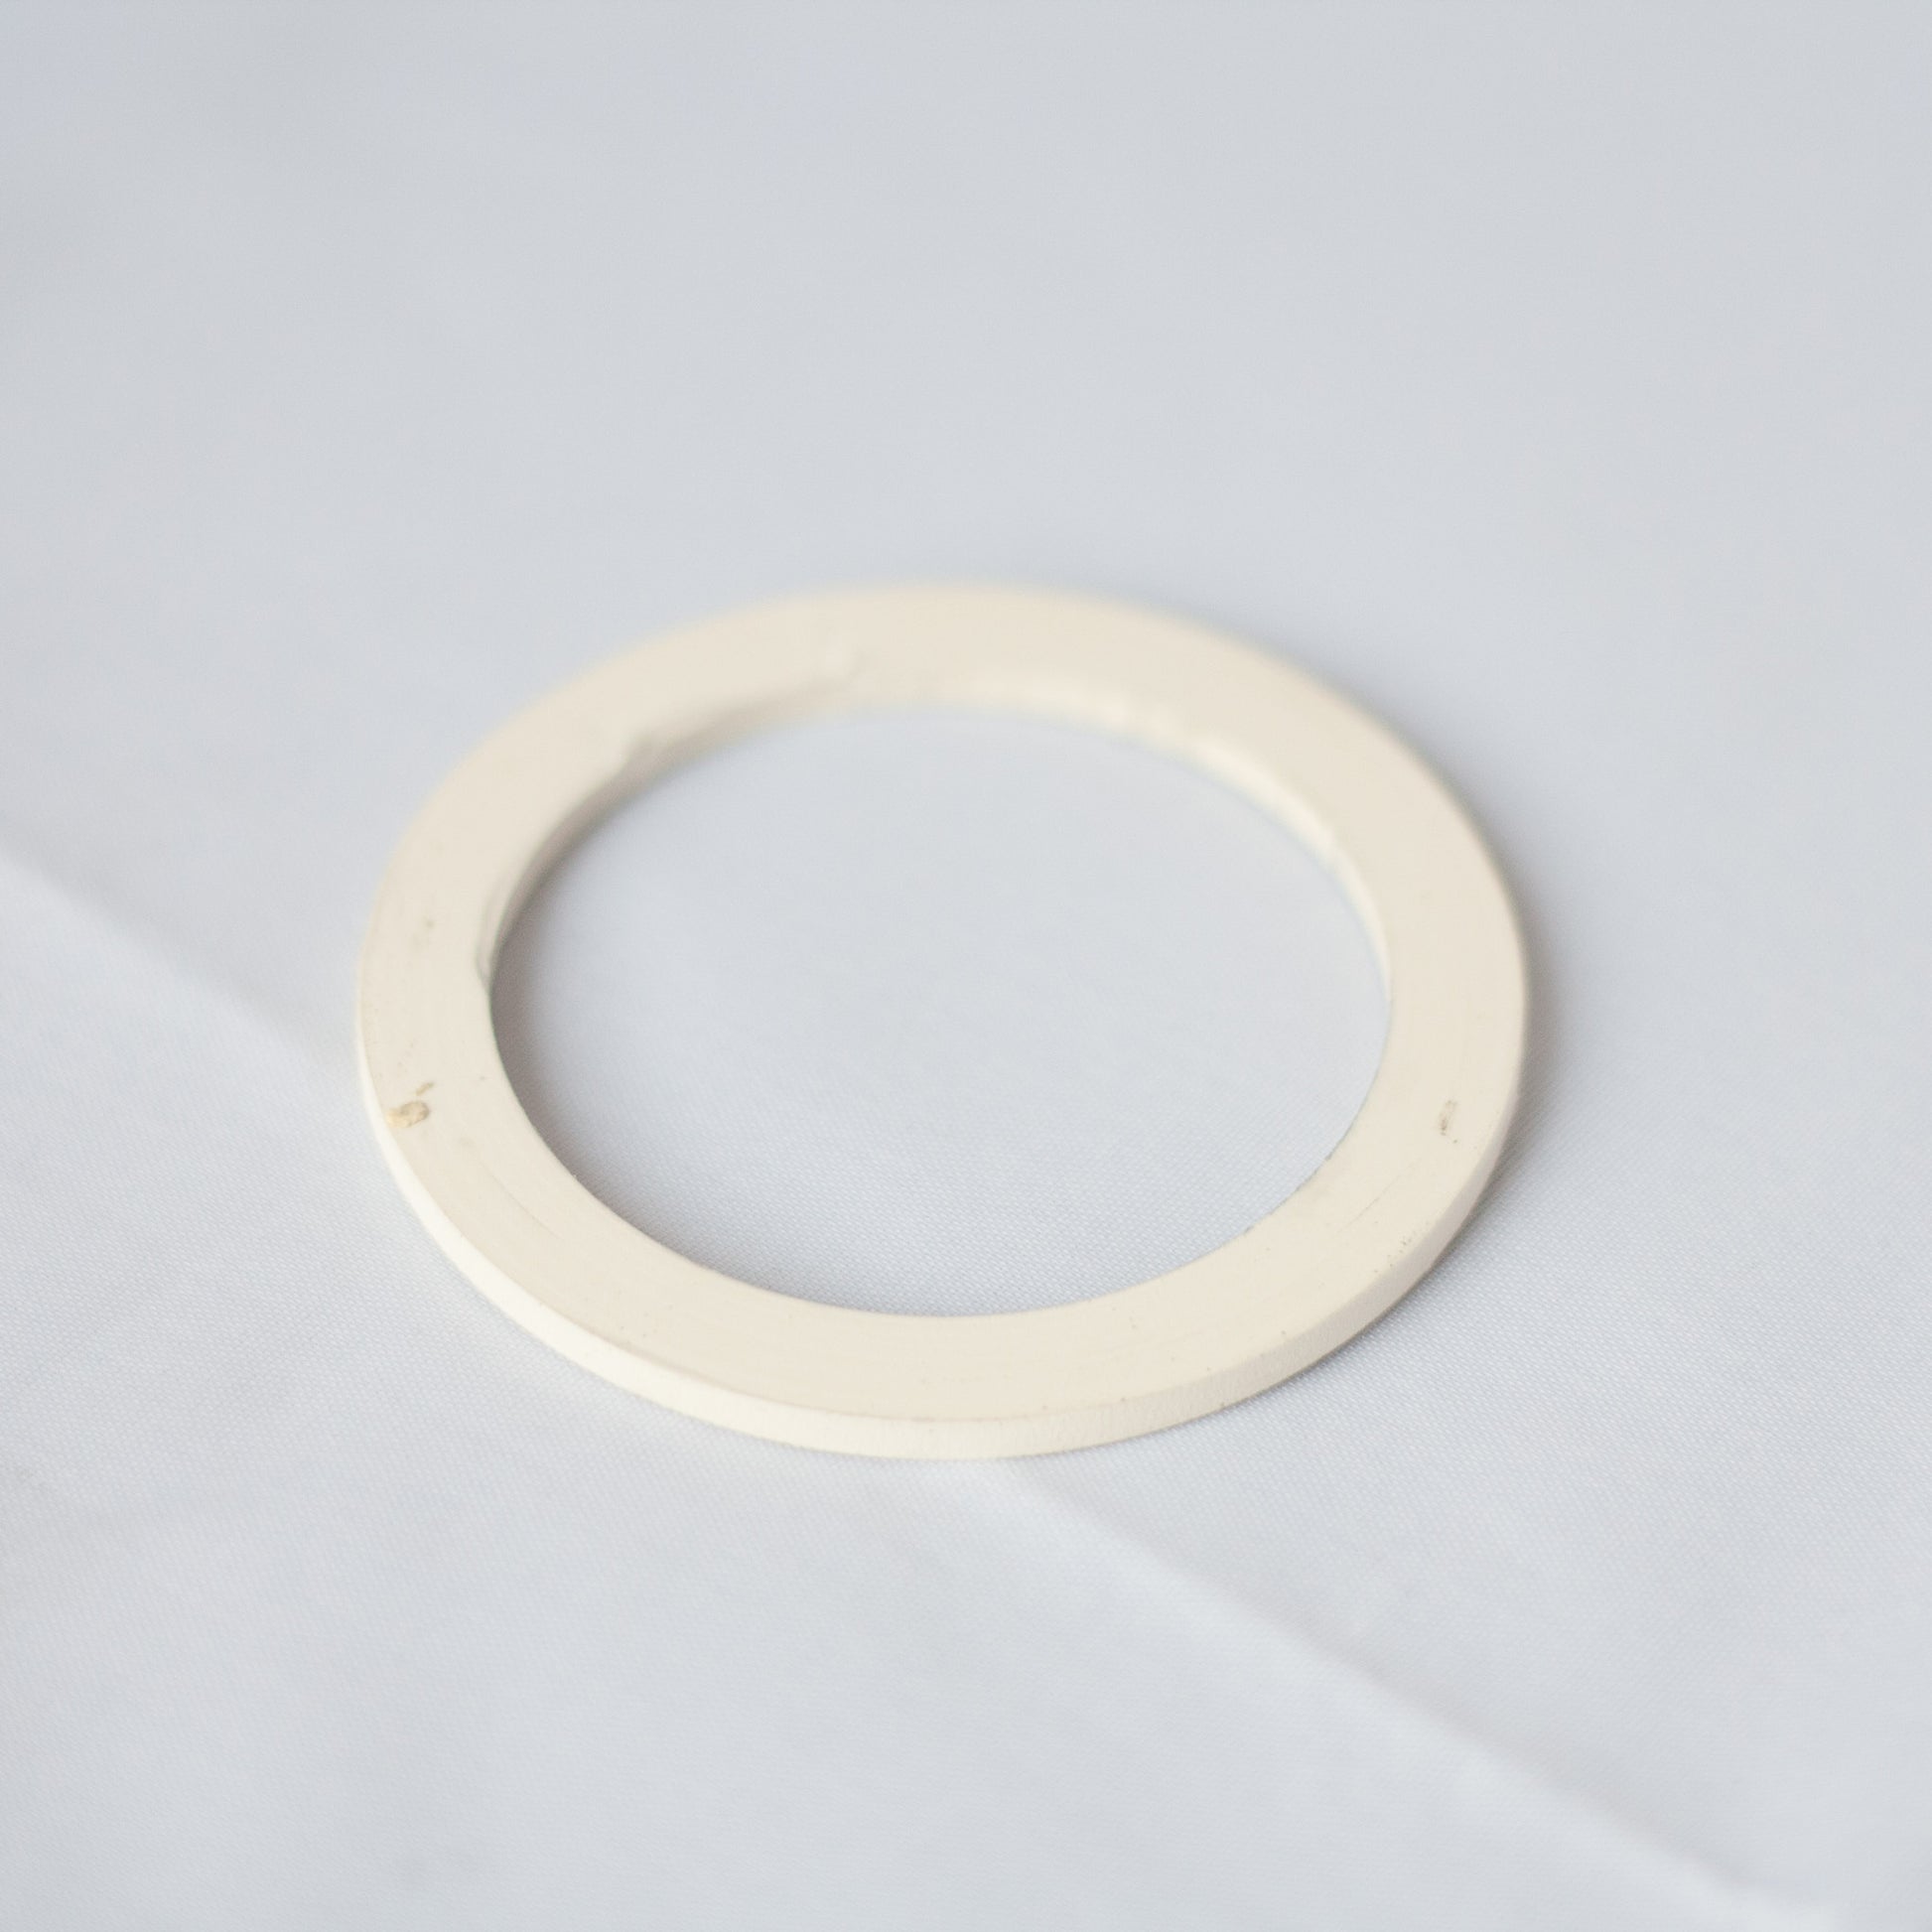 Rubber Gasket For Stovetop Pot-GST-McIver's Coffee & Tea